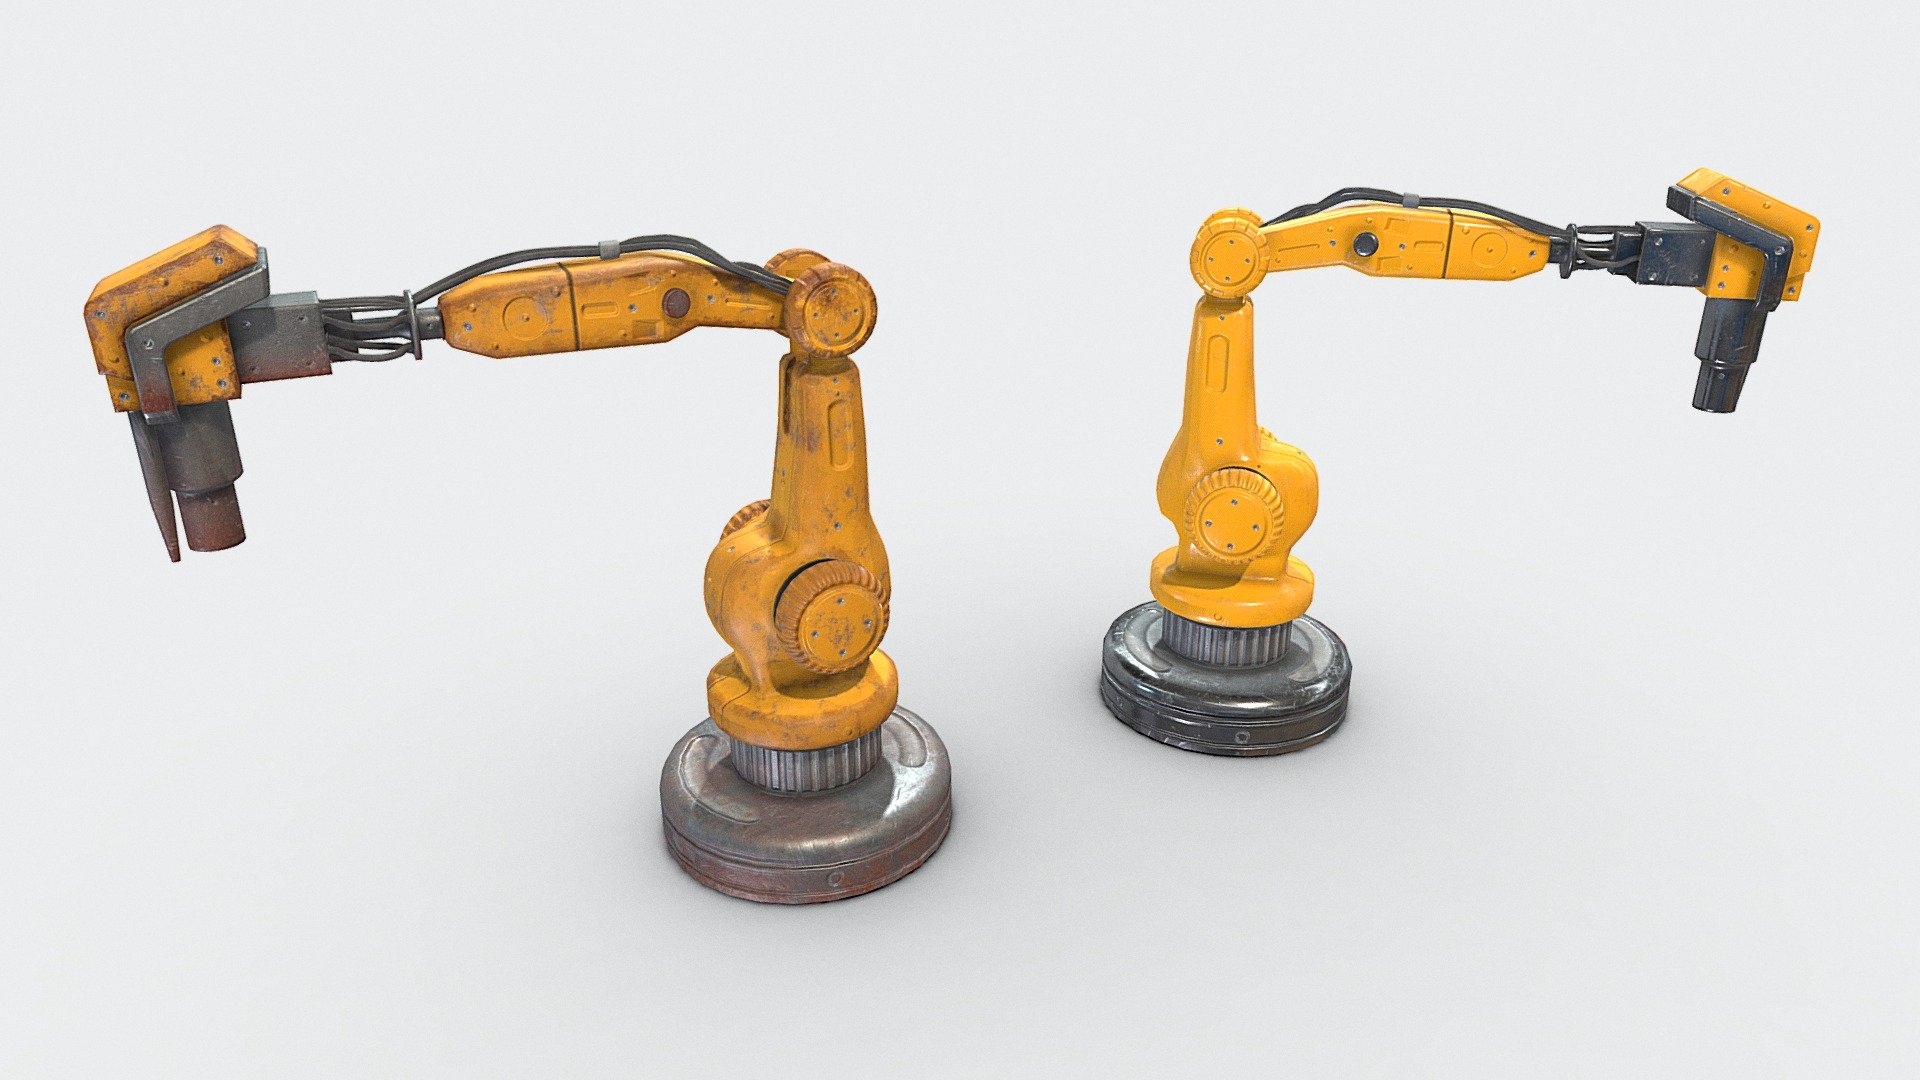 A pair of robotic arms, one version is clean and the other is rusty.  Handy props for any sort of environment. 

UDIM 4K PBR textures - Industrial arms - clean and dirty - Buy Royalty Free 3D model by Sousinho 3d model